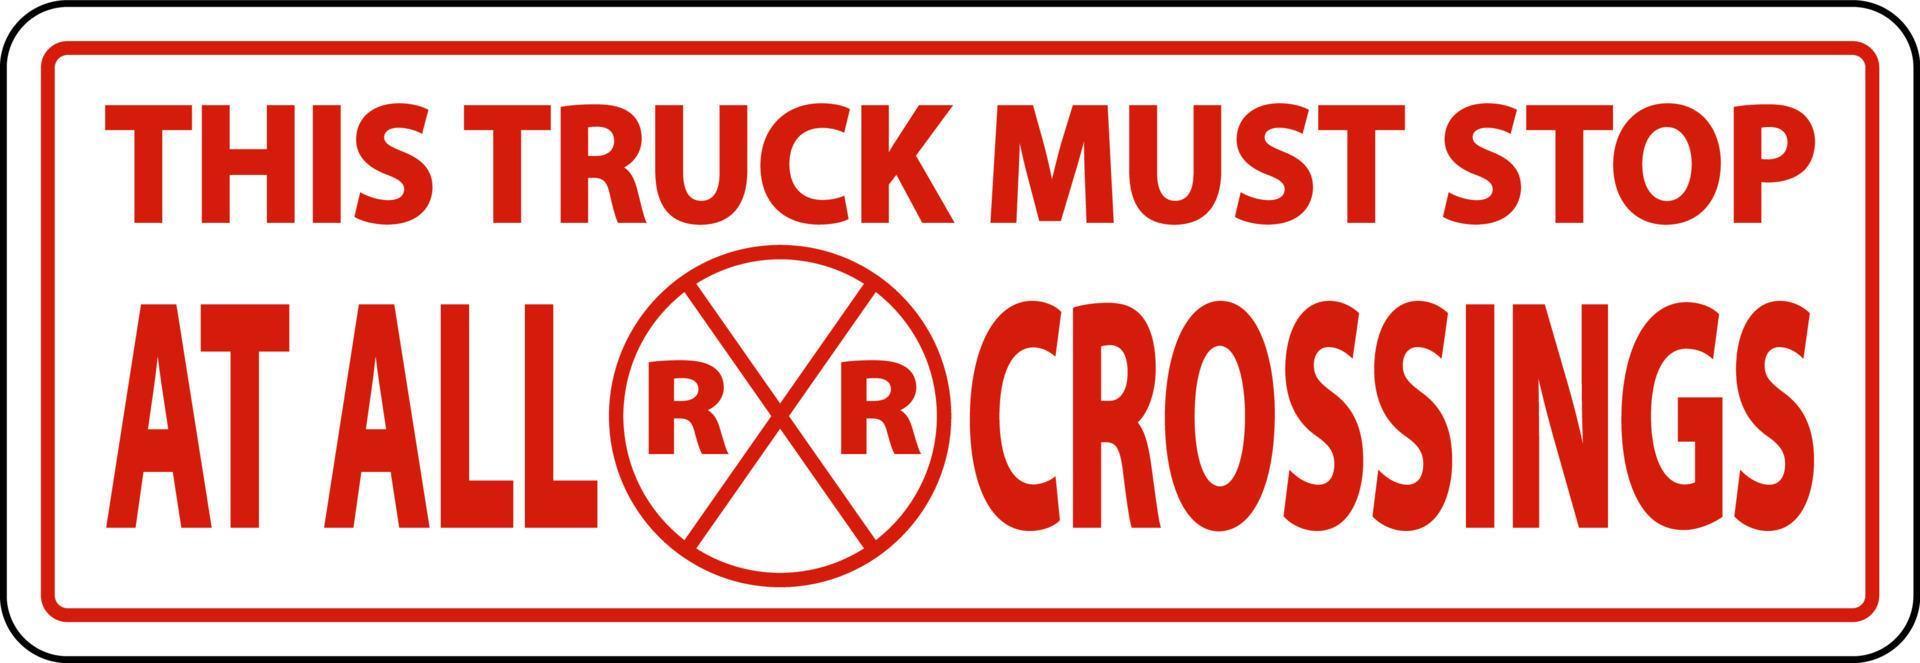 Must Stop At All Crossings Label Sign On White Background vector